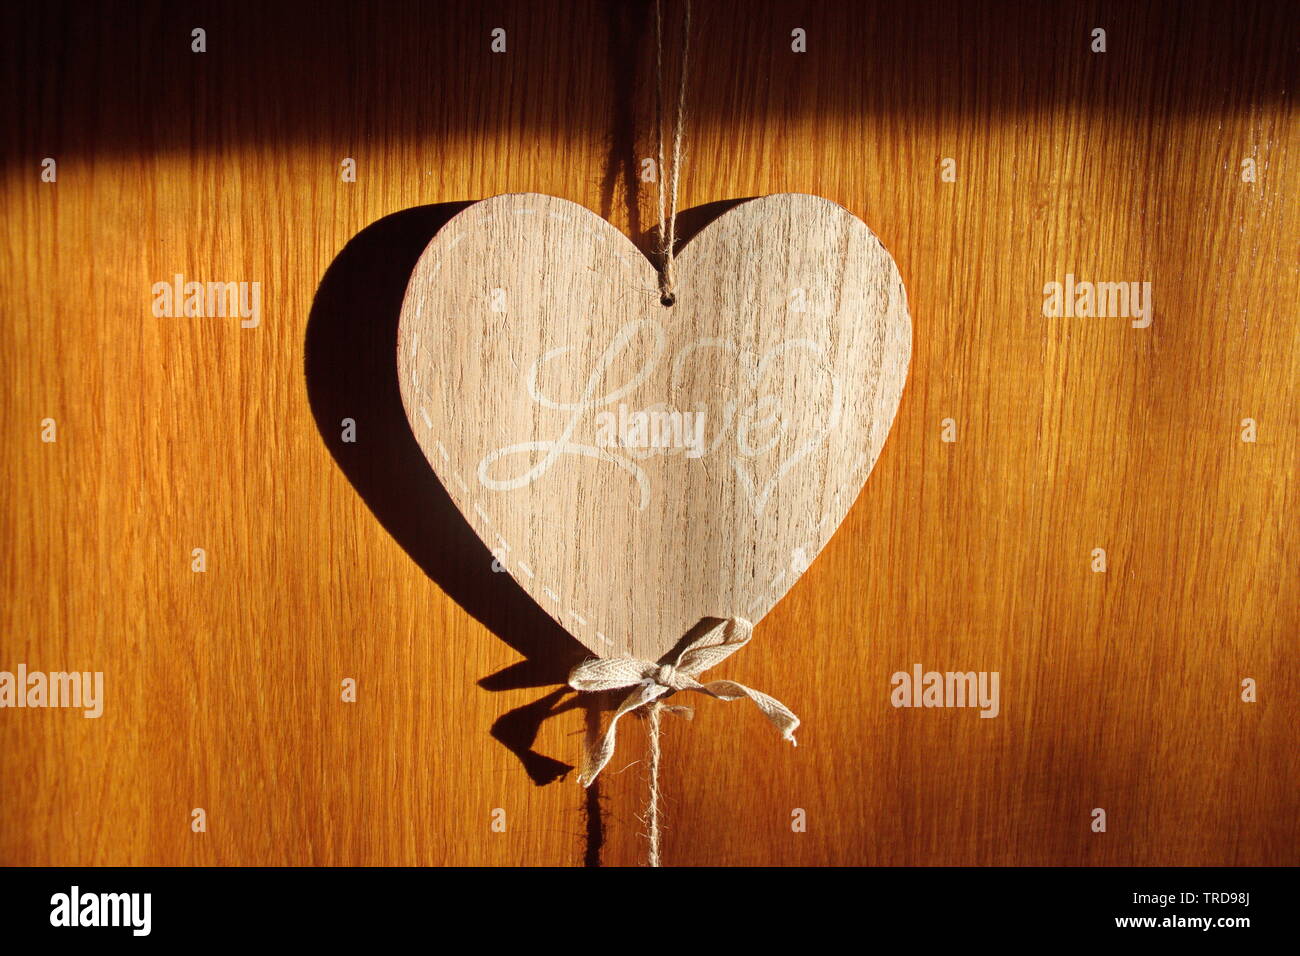 Wooden heart shape with text Love hanging on the wooden background Stock Photo